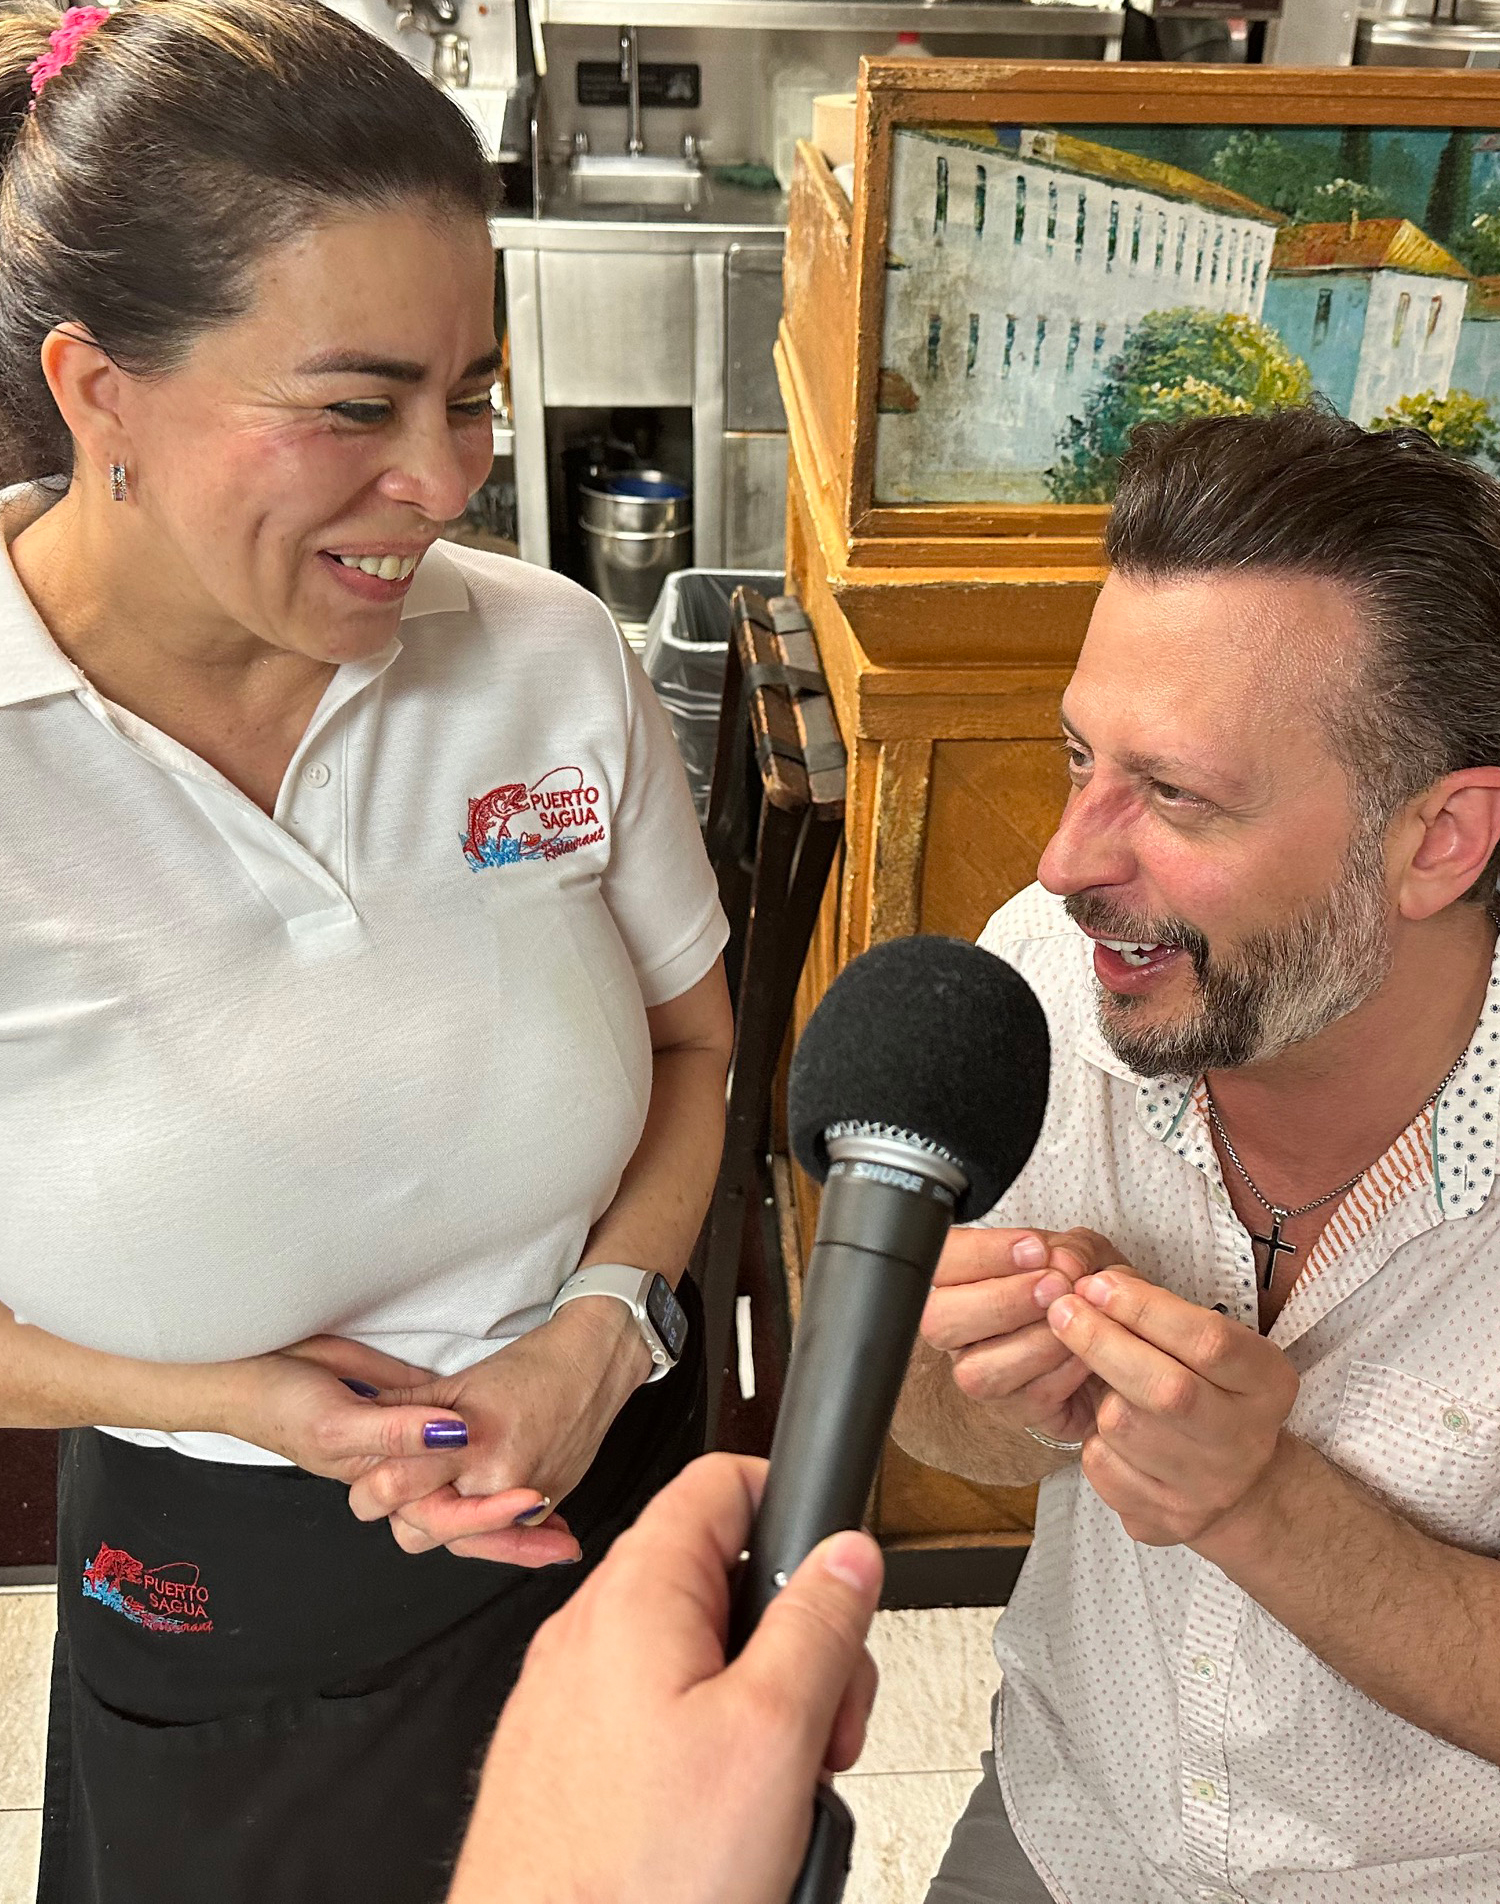 Sal Governale Flirted With Waitress in Spanish at Staff Dinner in Miami Howard Stern